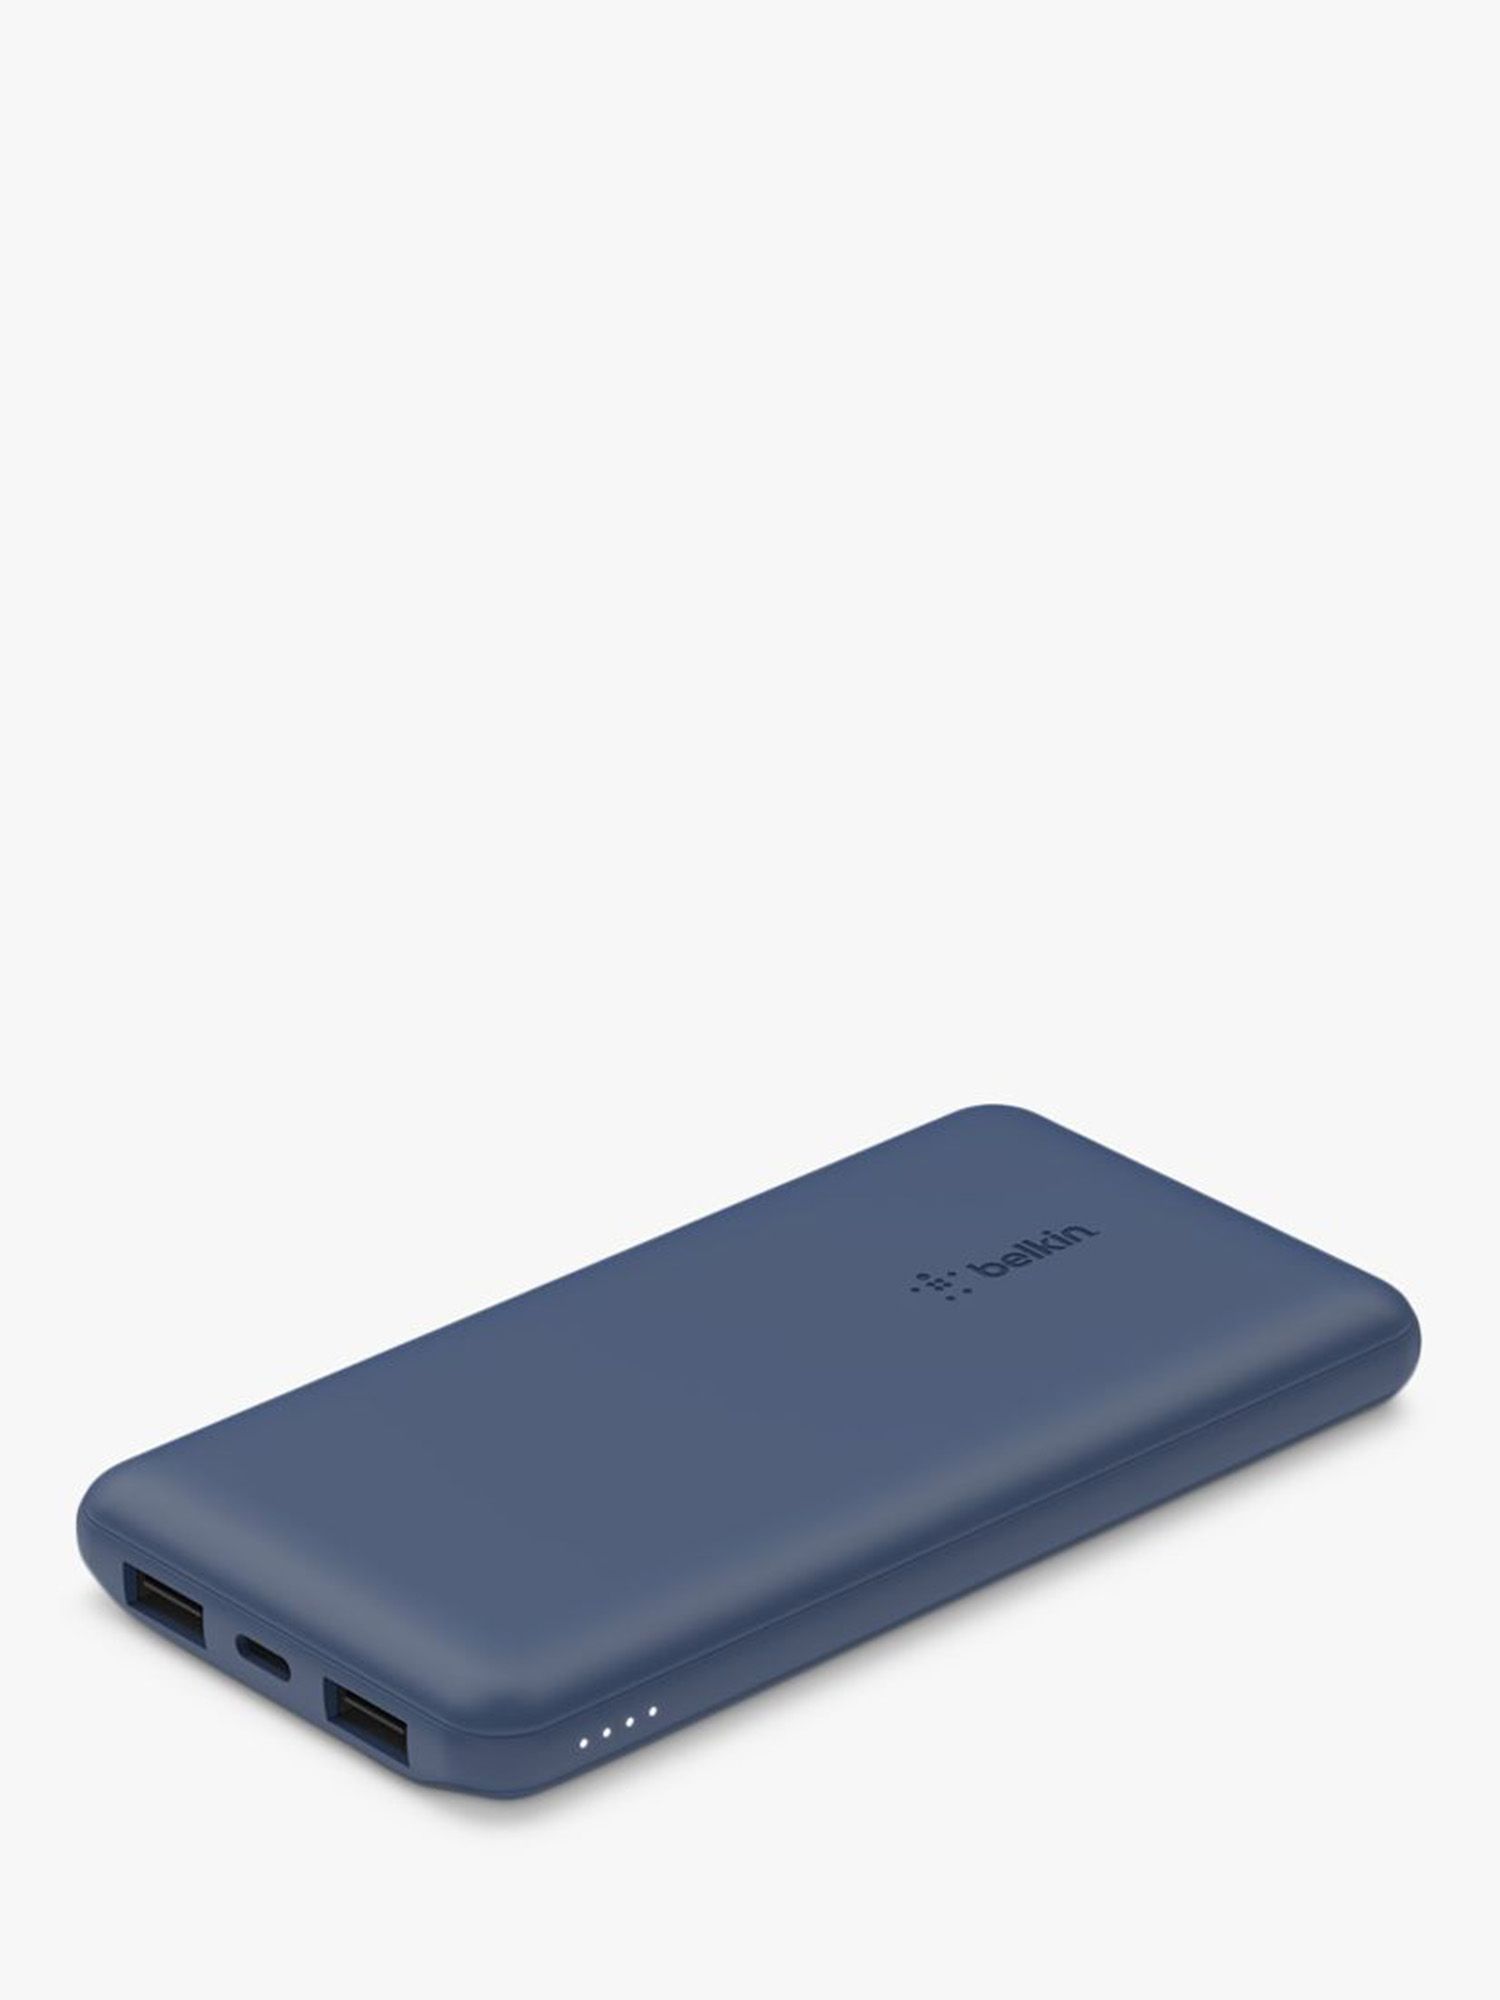 Blue power bank on a white background